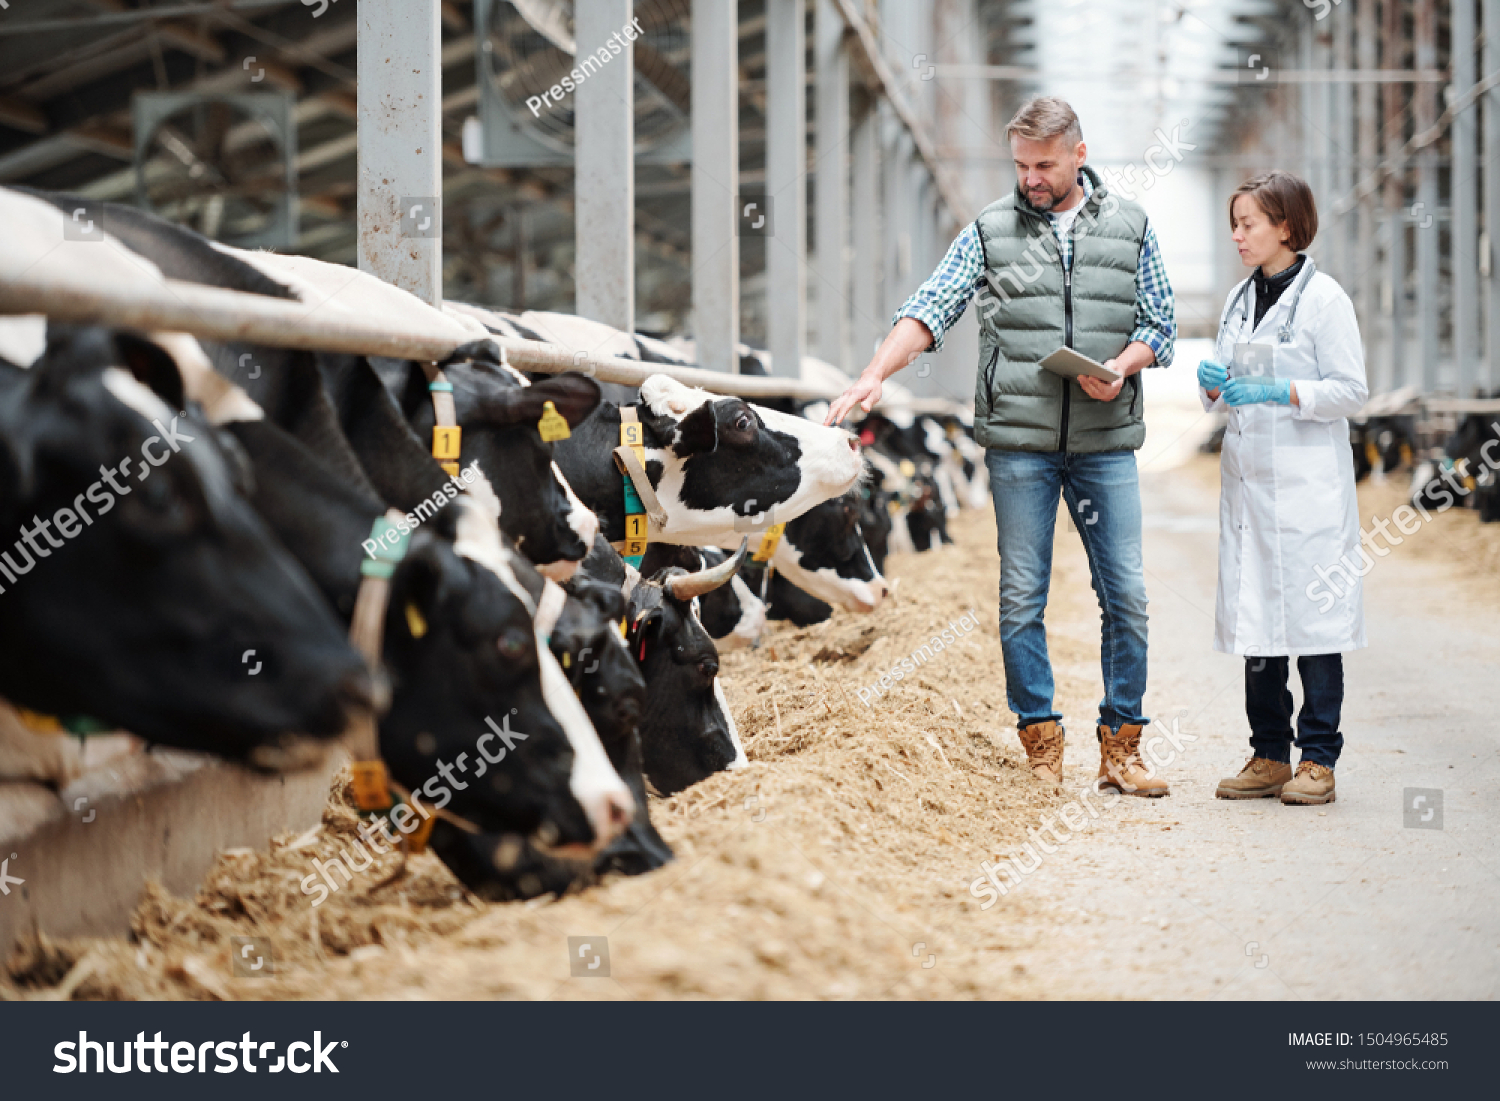 Mature head of large dairy farm with touchpad touching one of cows while consulting with veterinarian by cowshed #1504965485